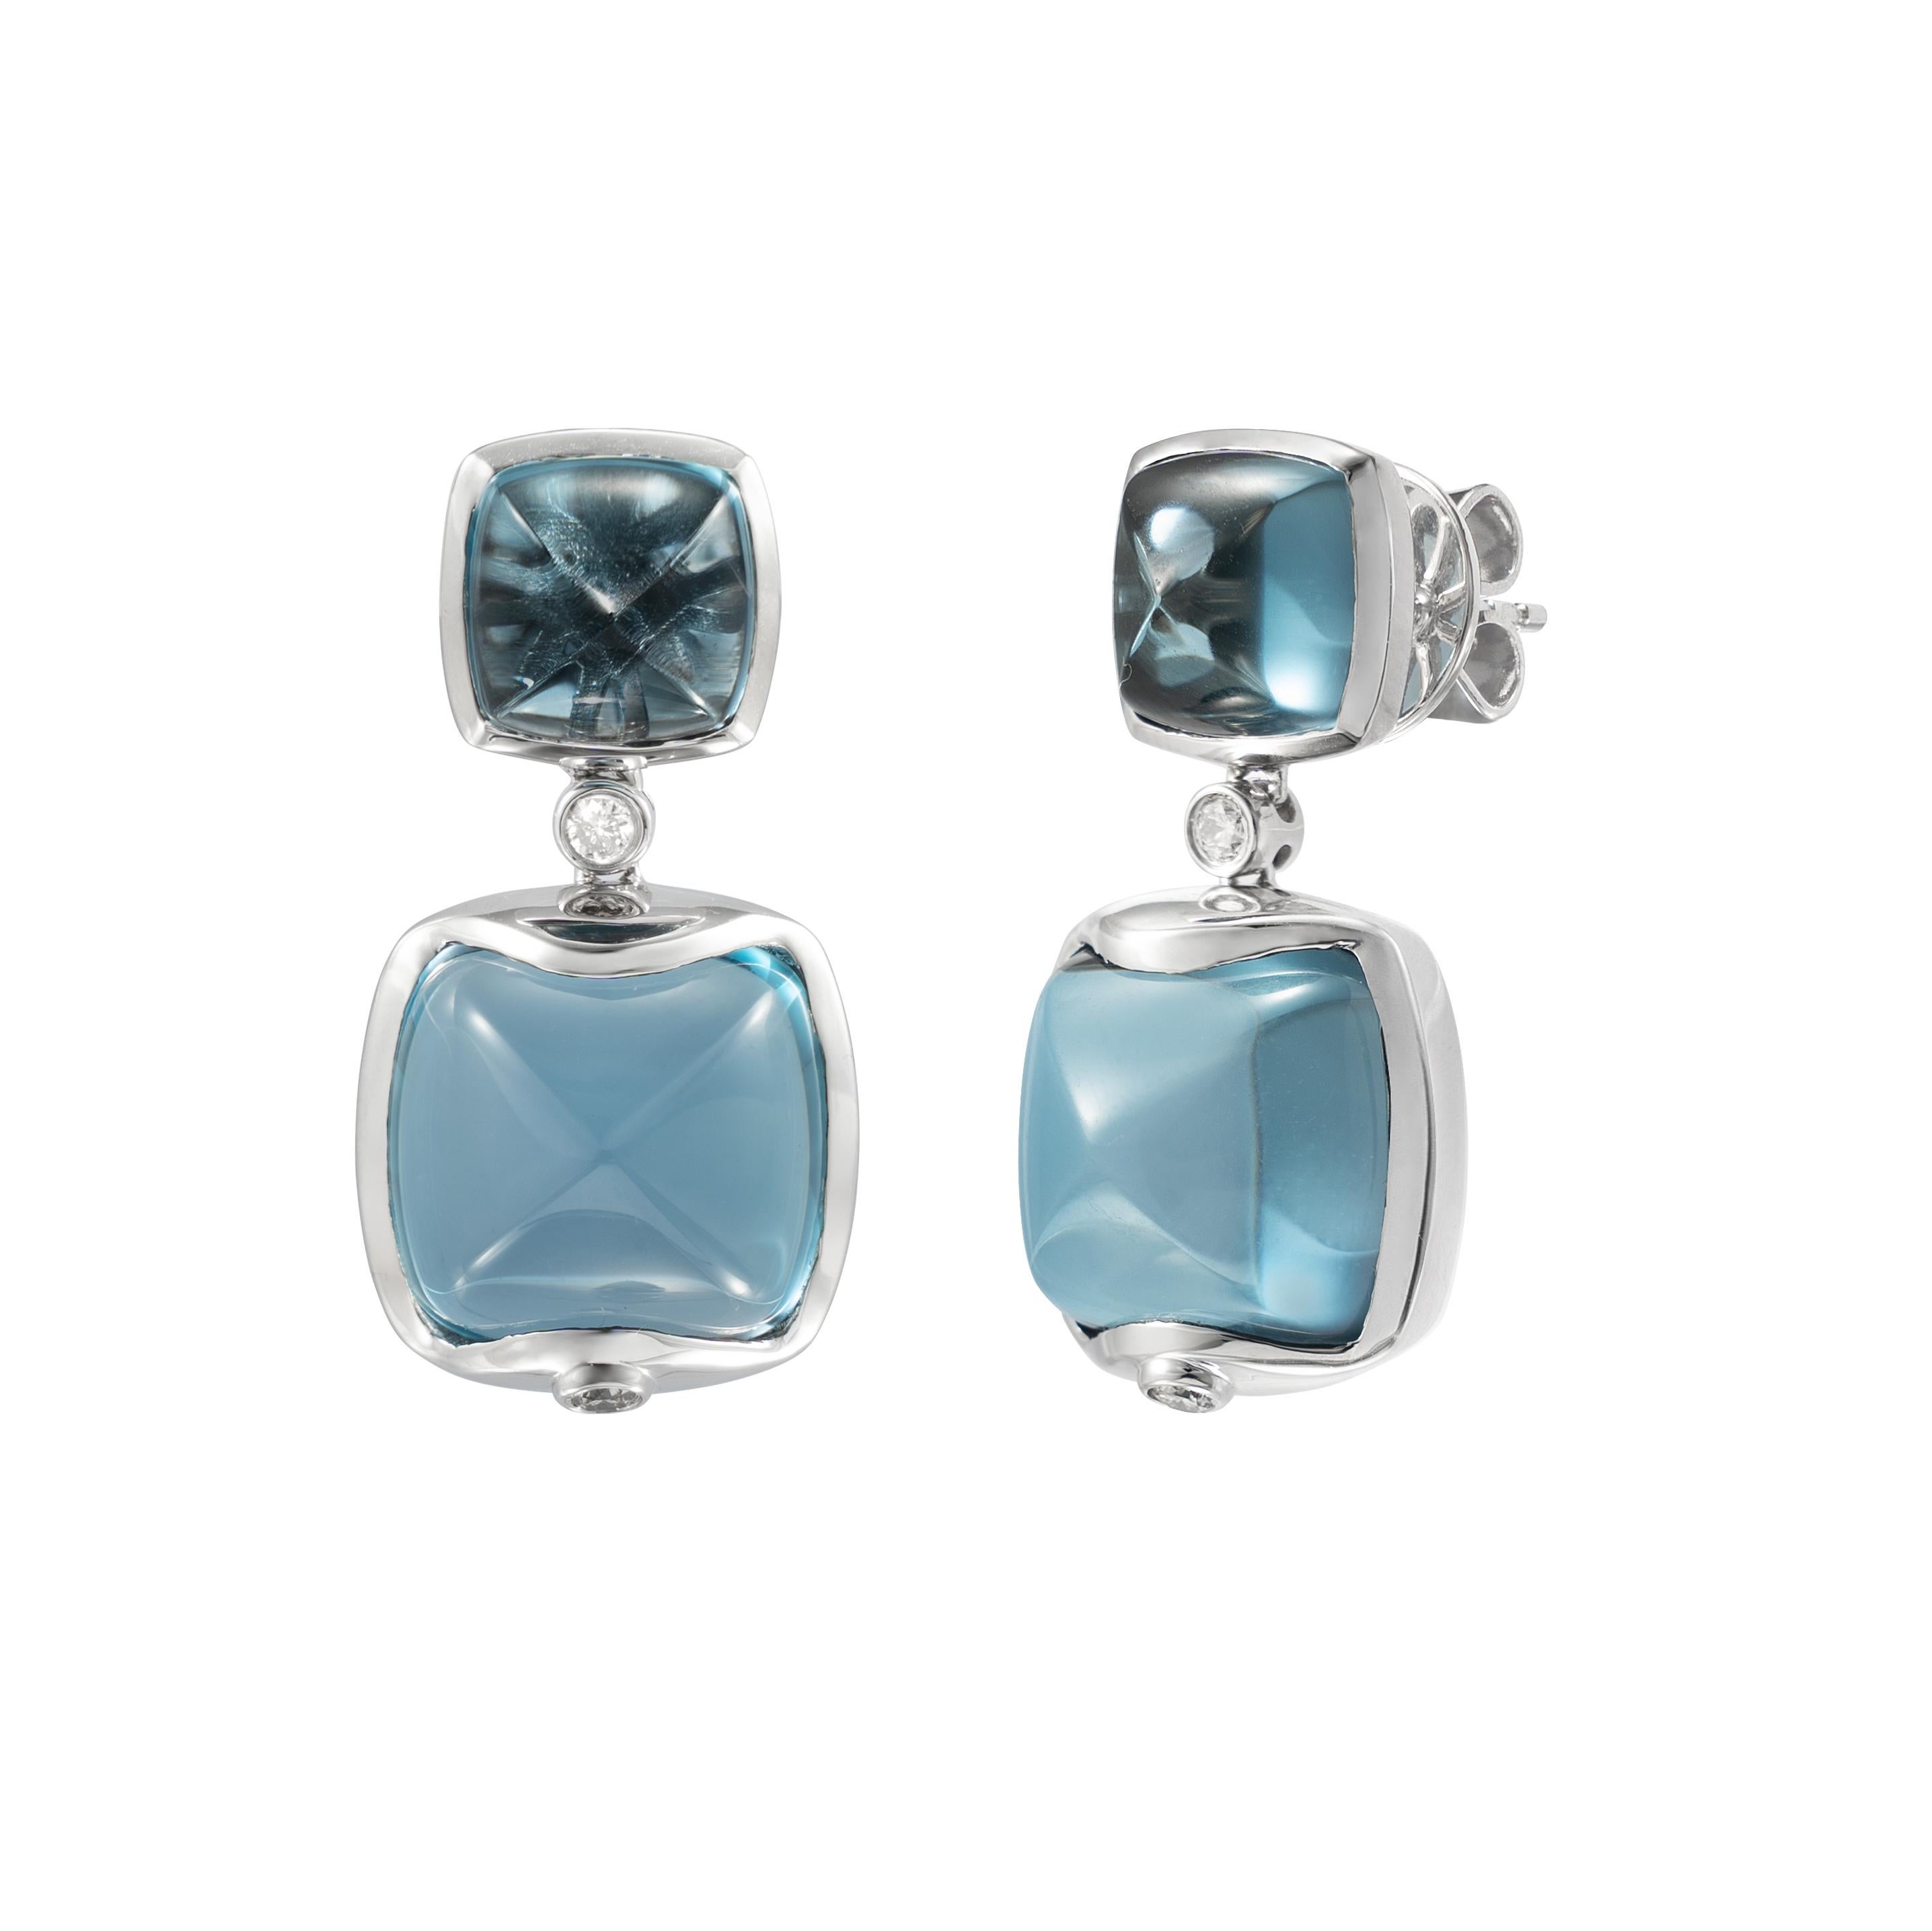 Sweet Sugarloaves! Light and easy to wear these earrings showcase beautiful sugarloaf gemstones accented with a gold frame and diamonds. These earrings are dainty yet have a great pop of color from the vibrant gems.

Blue Topaz Sugarloaf Earrings